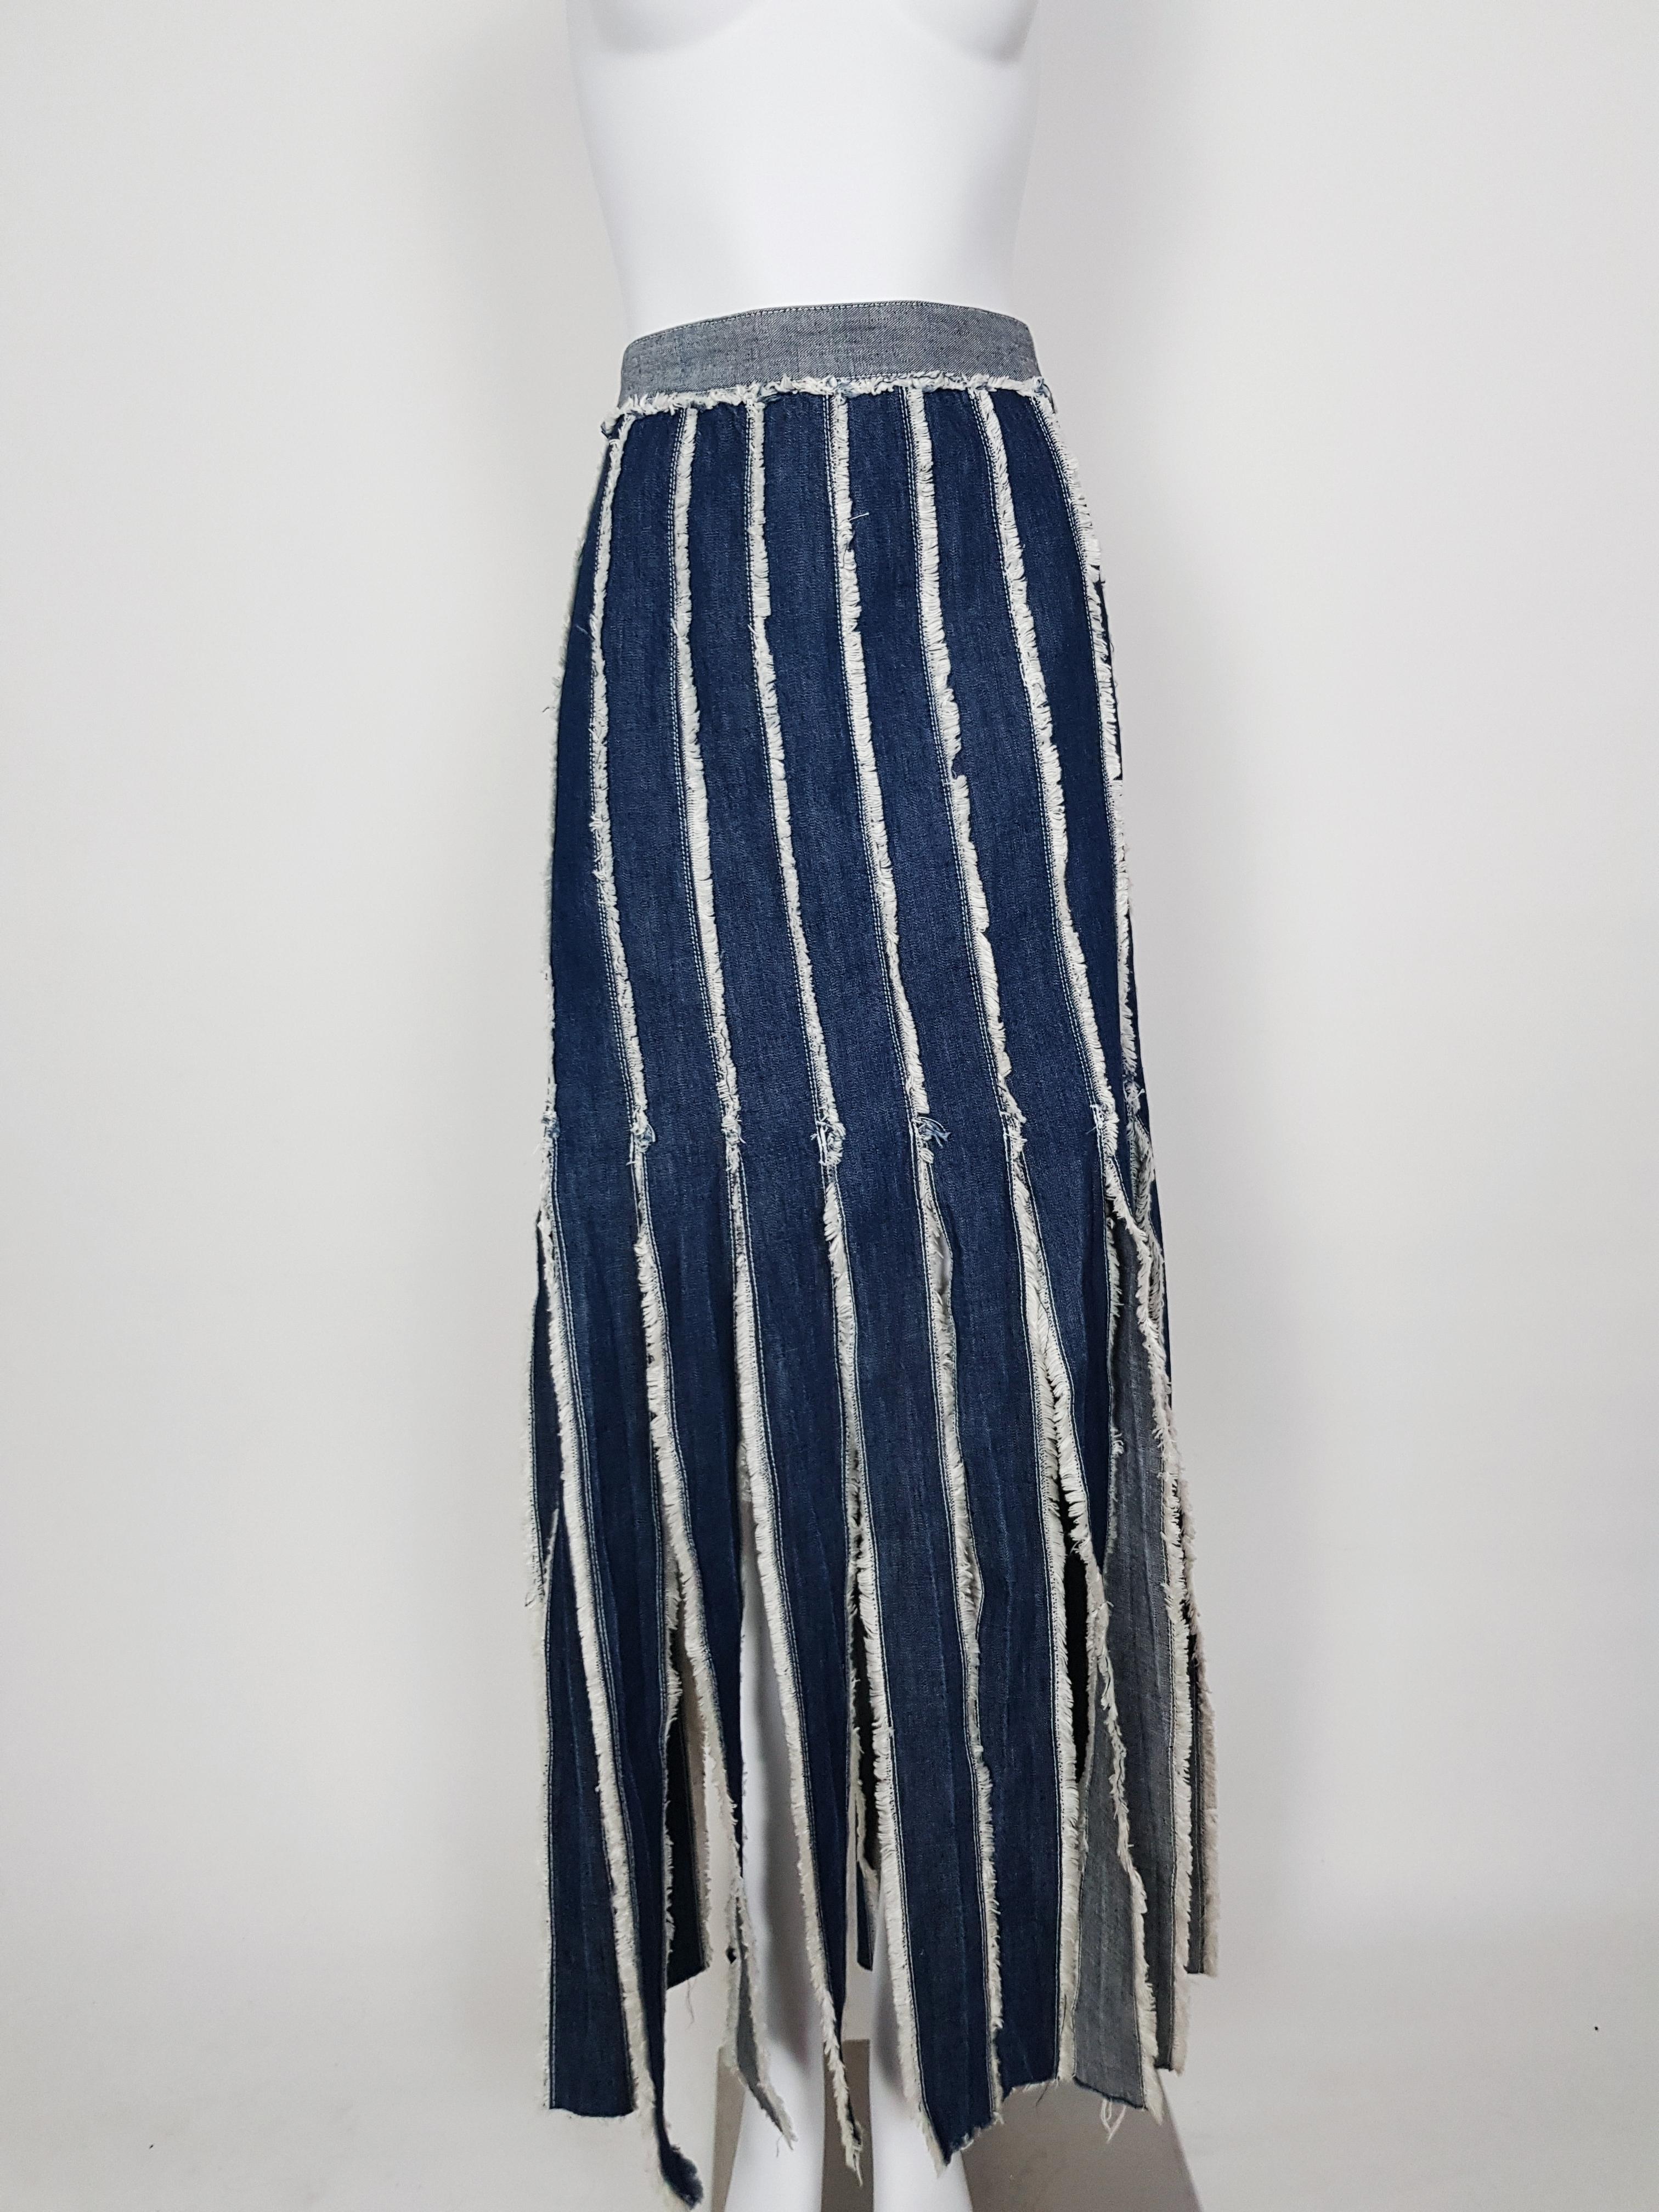 Blue denim skirt with fringe trim by Jean Paul Gaultier, wear yours with the matching shirt.

-Frayed fringe details along seams and hems
-Metal zipper and logo on the side
-100% Cotton
-Estimated size: 40 FR to 44 FR (marked as 44FR)
-Very good